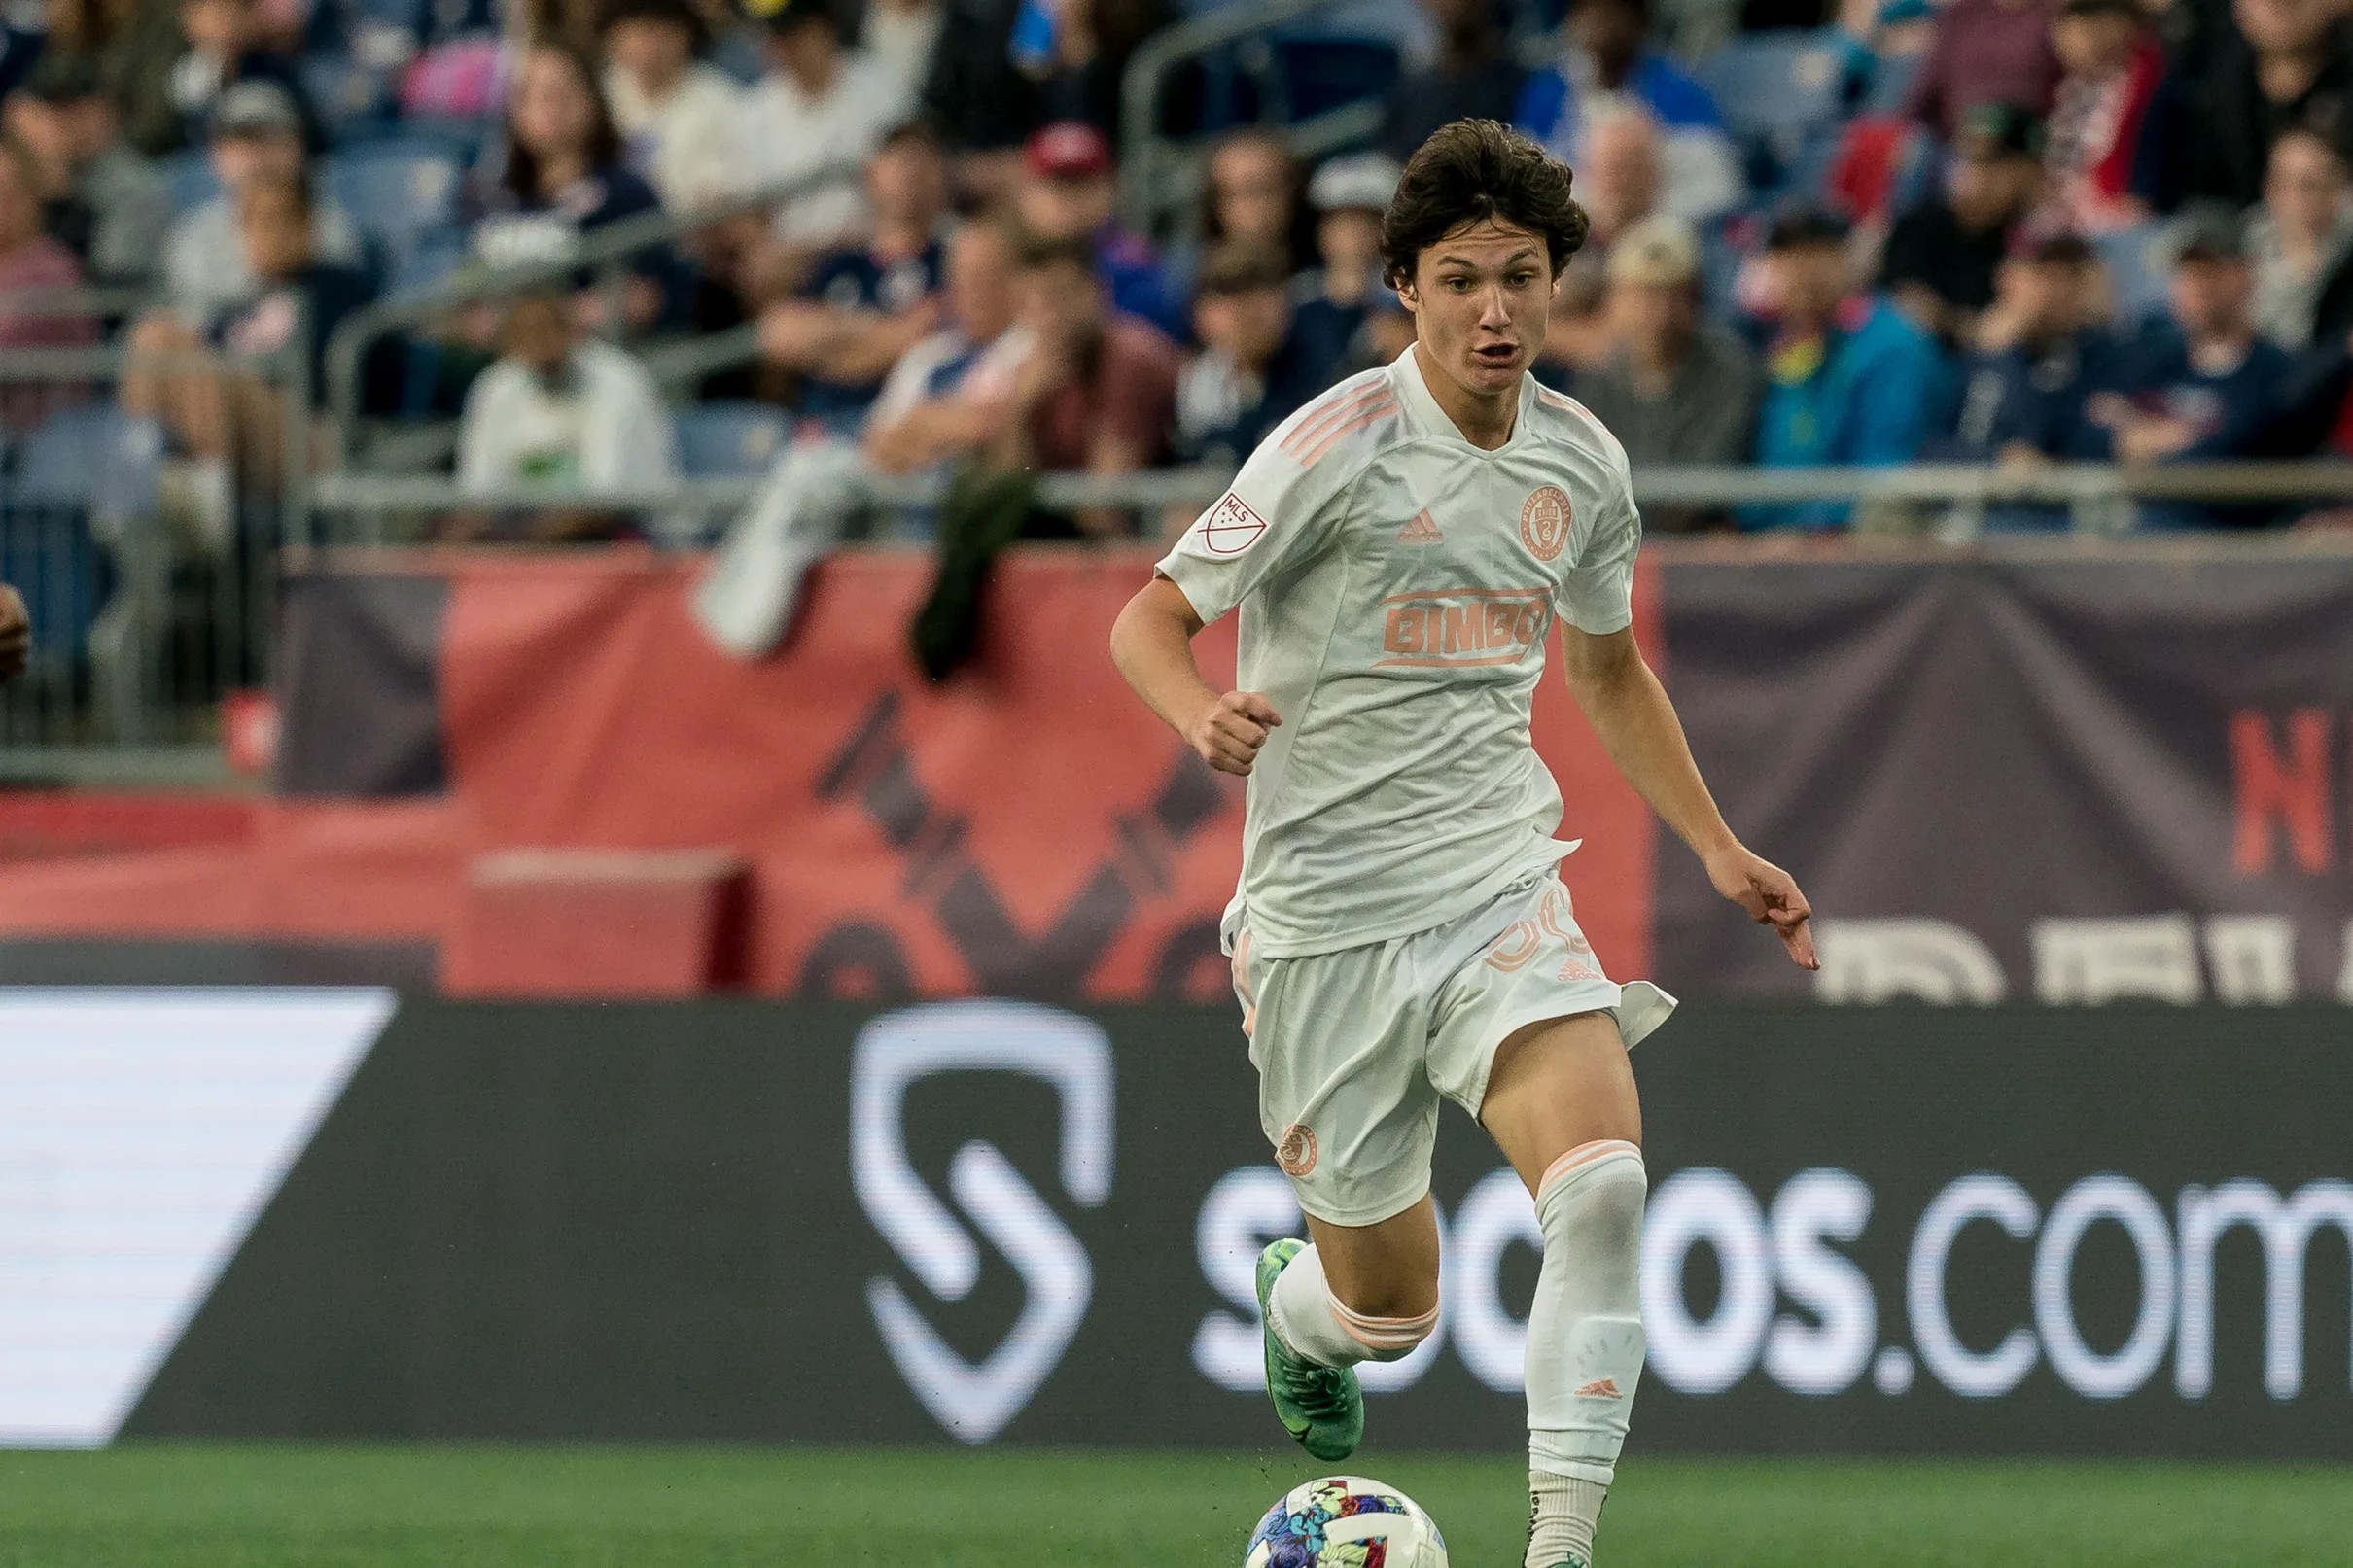 Breaking down the Concacaf U20 Championship roster